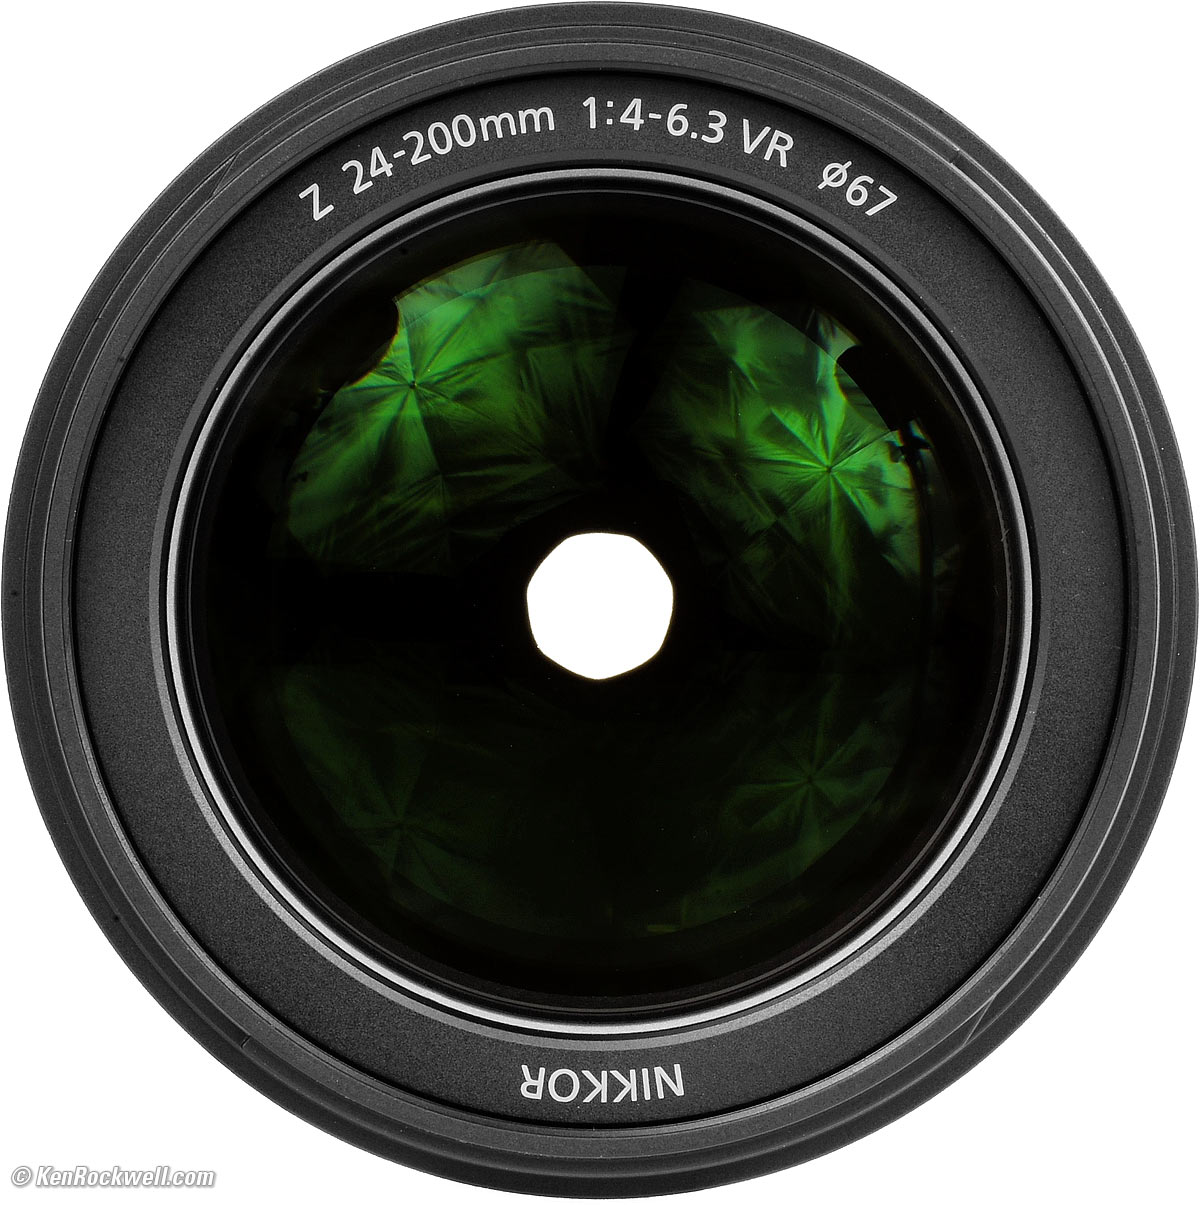 Sample Rockwell by & Ken 24‑200mm Images Review Z Nikon VR